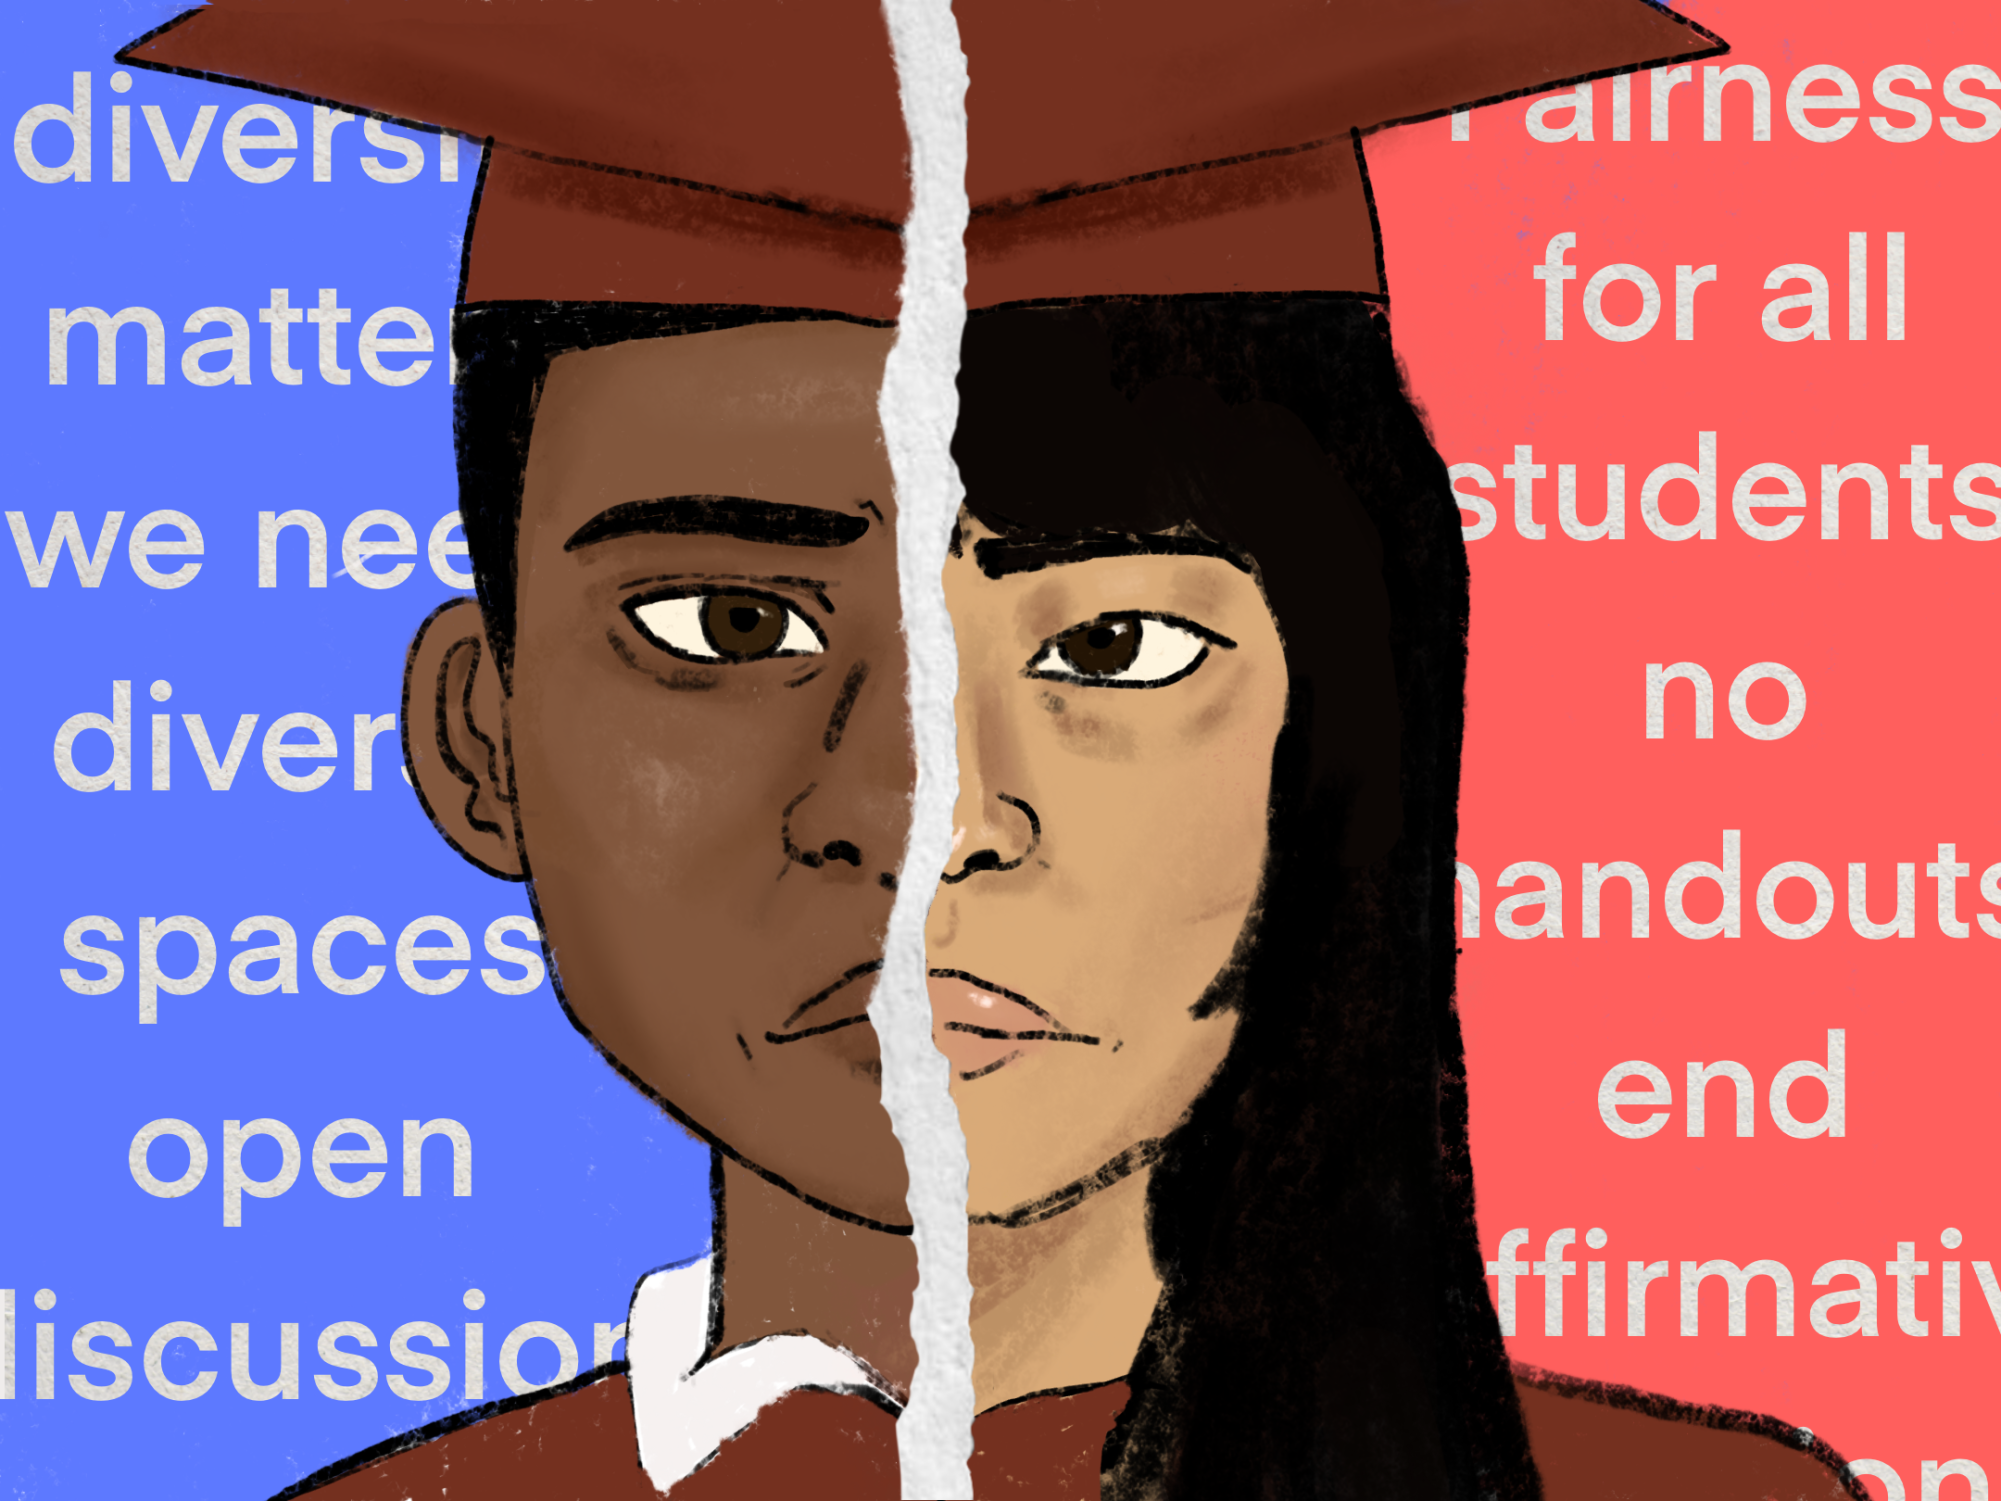 PRO/CON: Affirmative Action Aims